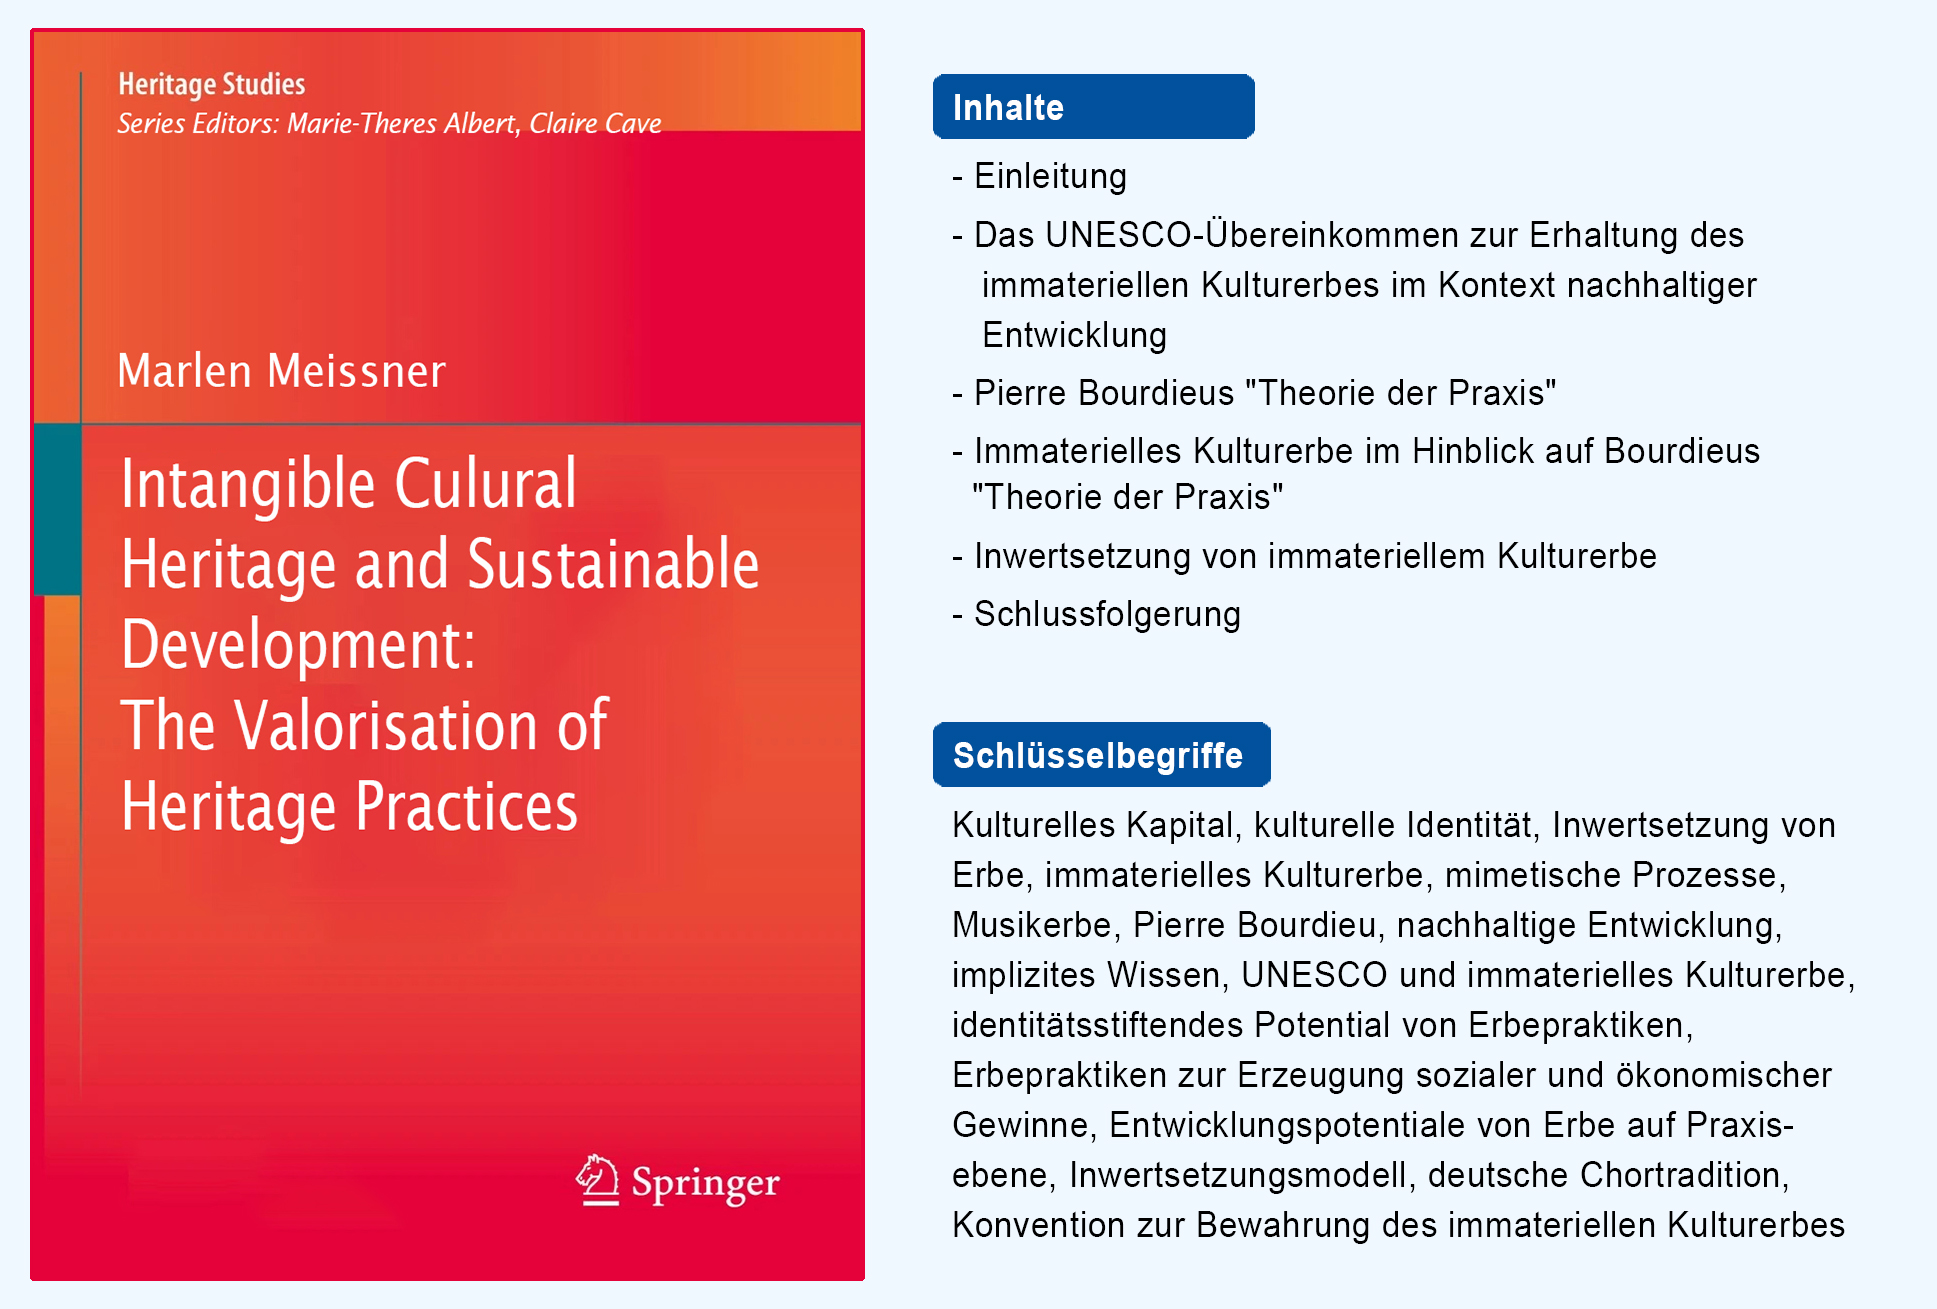 Intangible Cultural Heritage and Sustainable Development: The Valorisation of Heritage Practices